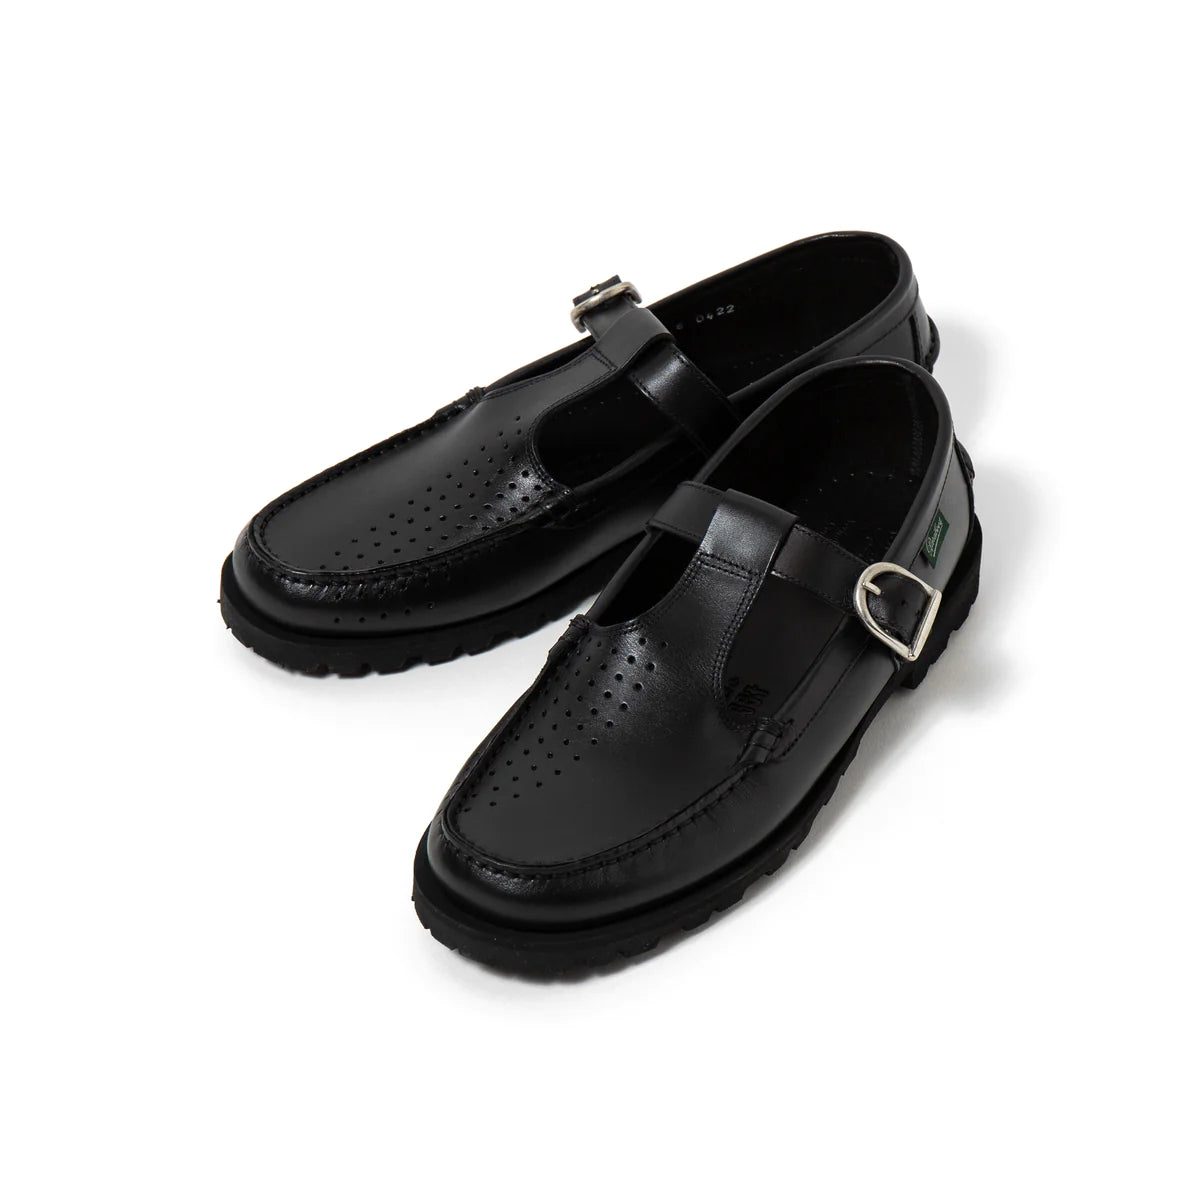 Paraboot Babord F noir- Genuine rubber sole